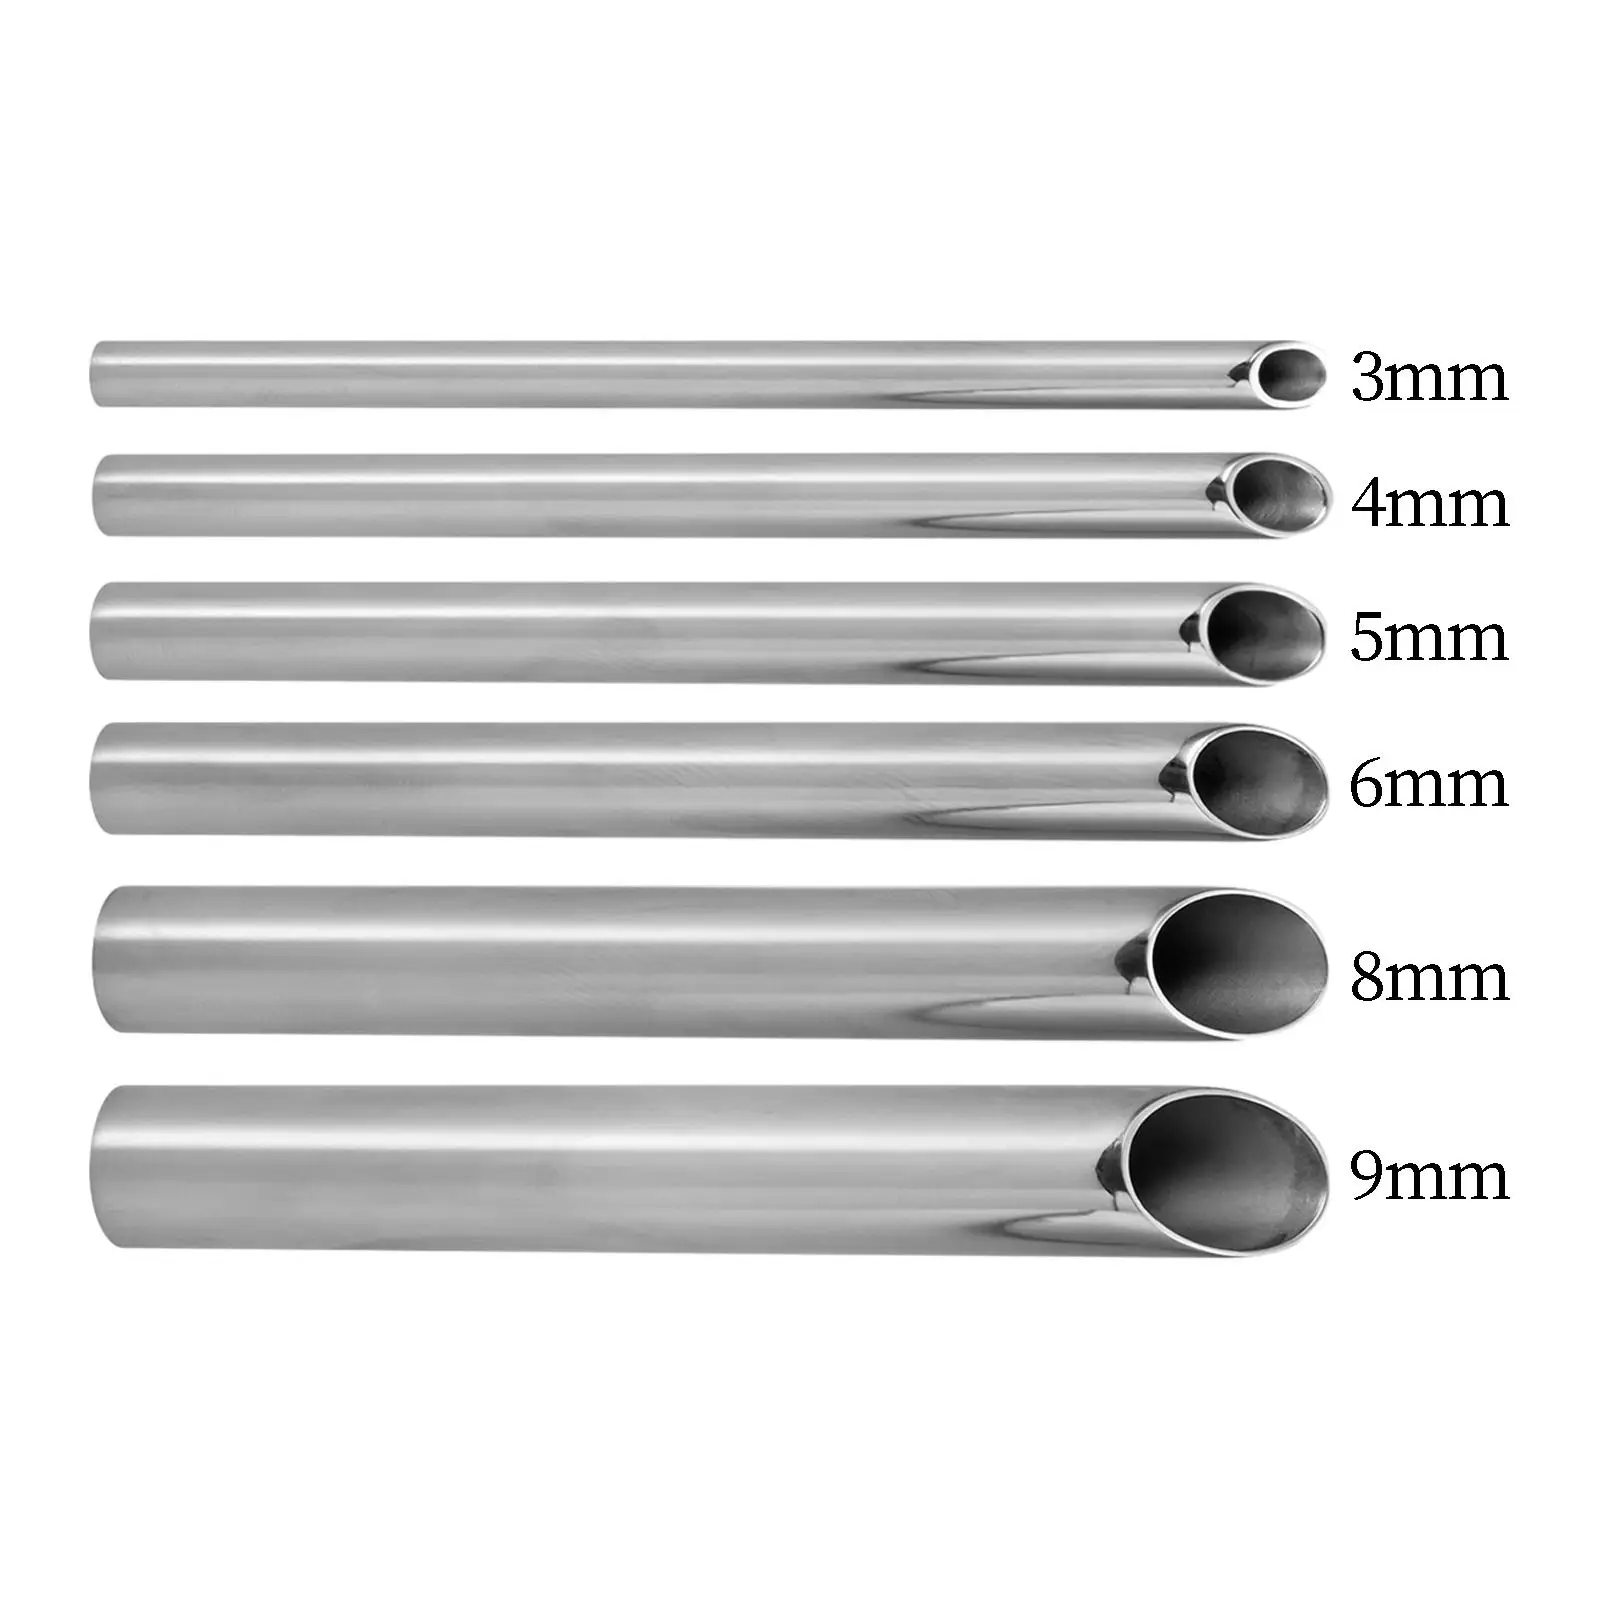 Steel Piercing Receiver Tube Auxiliary Professional Tool Body Jewelry Holding Piercing Tool for Nose Ear Belly Lip